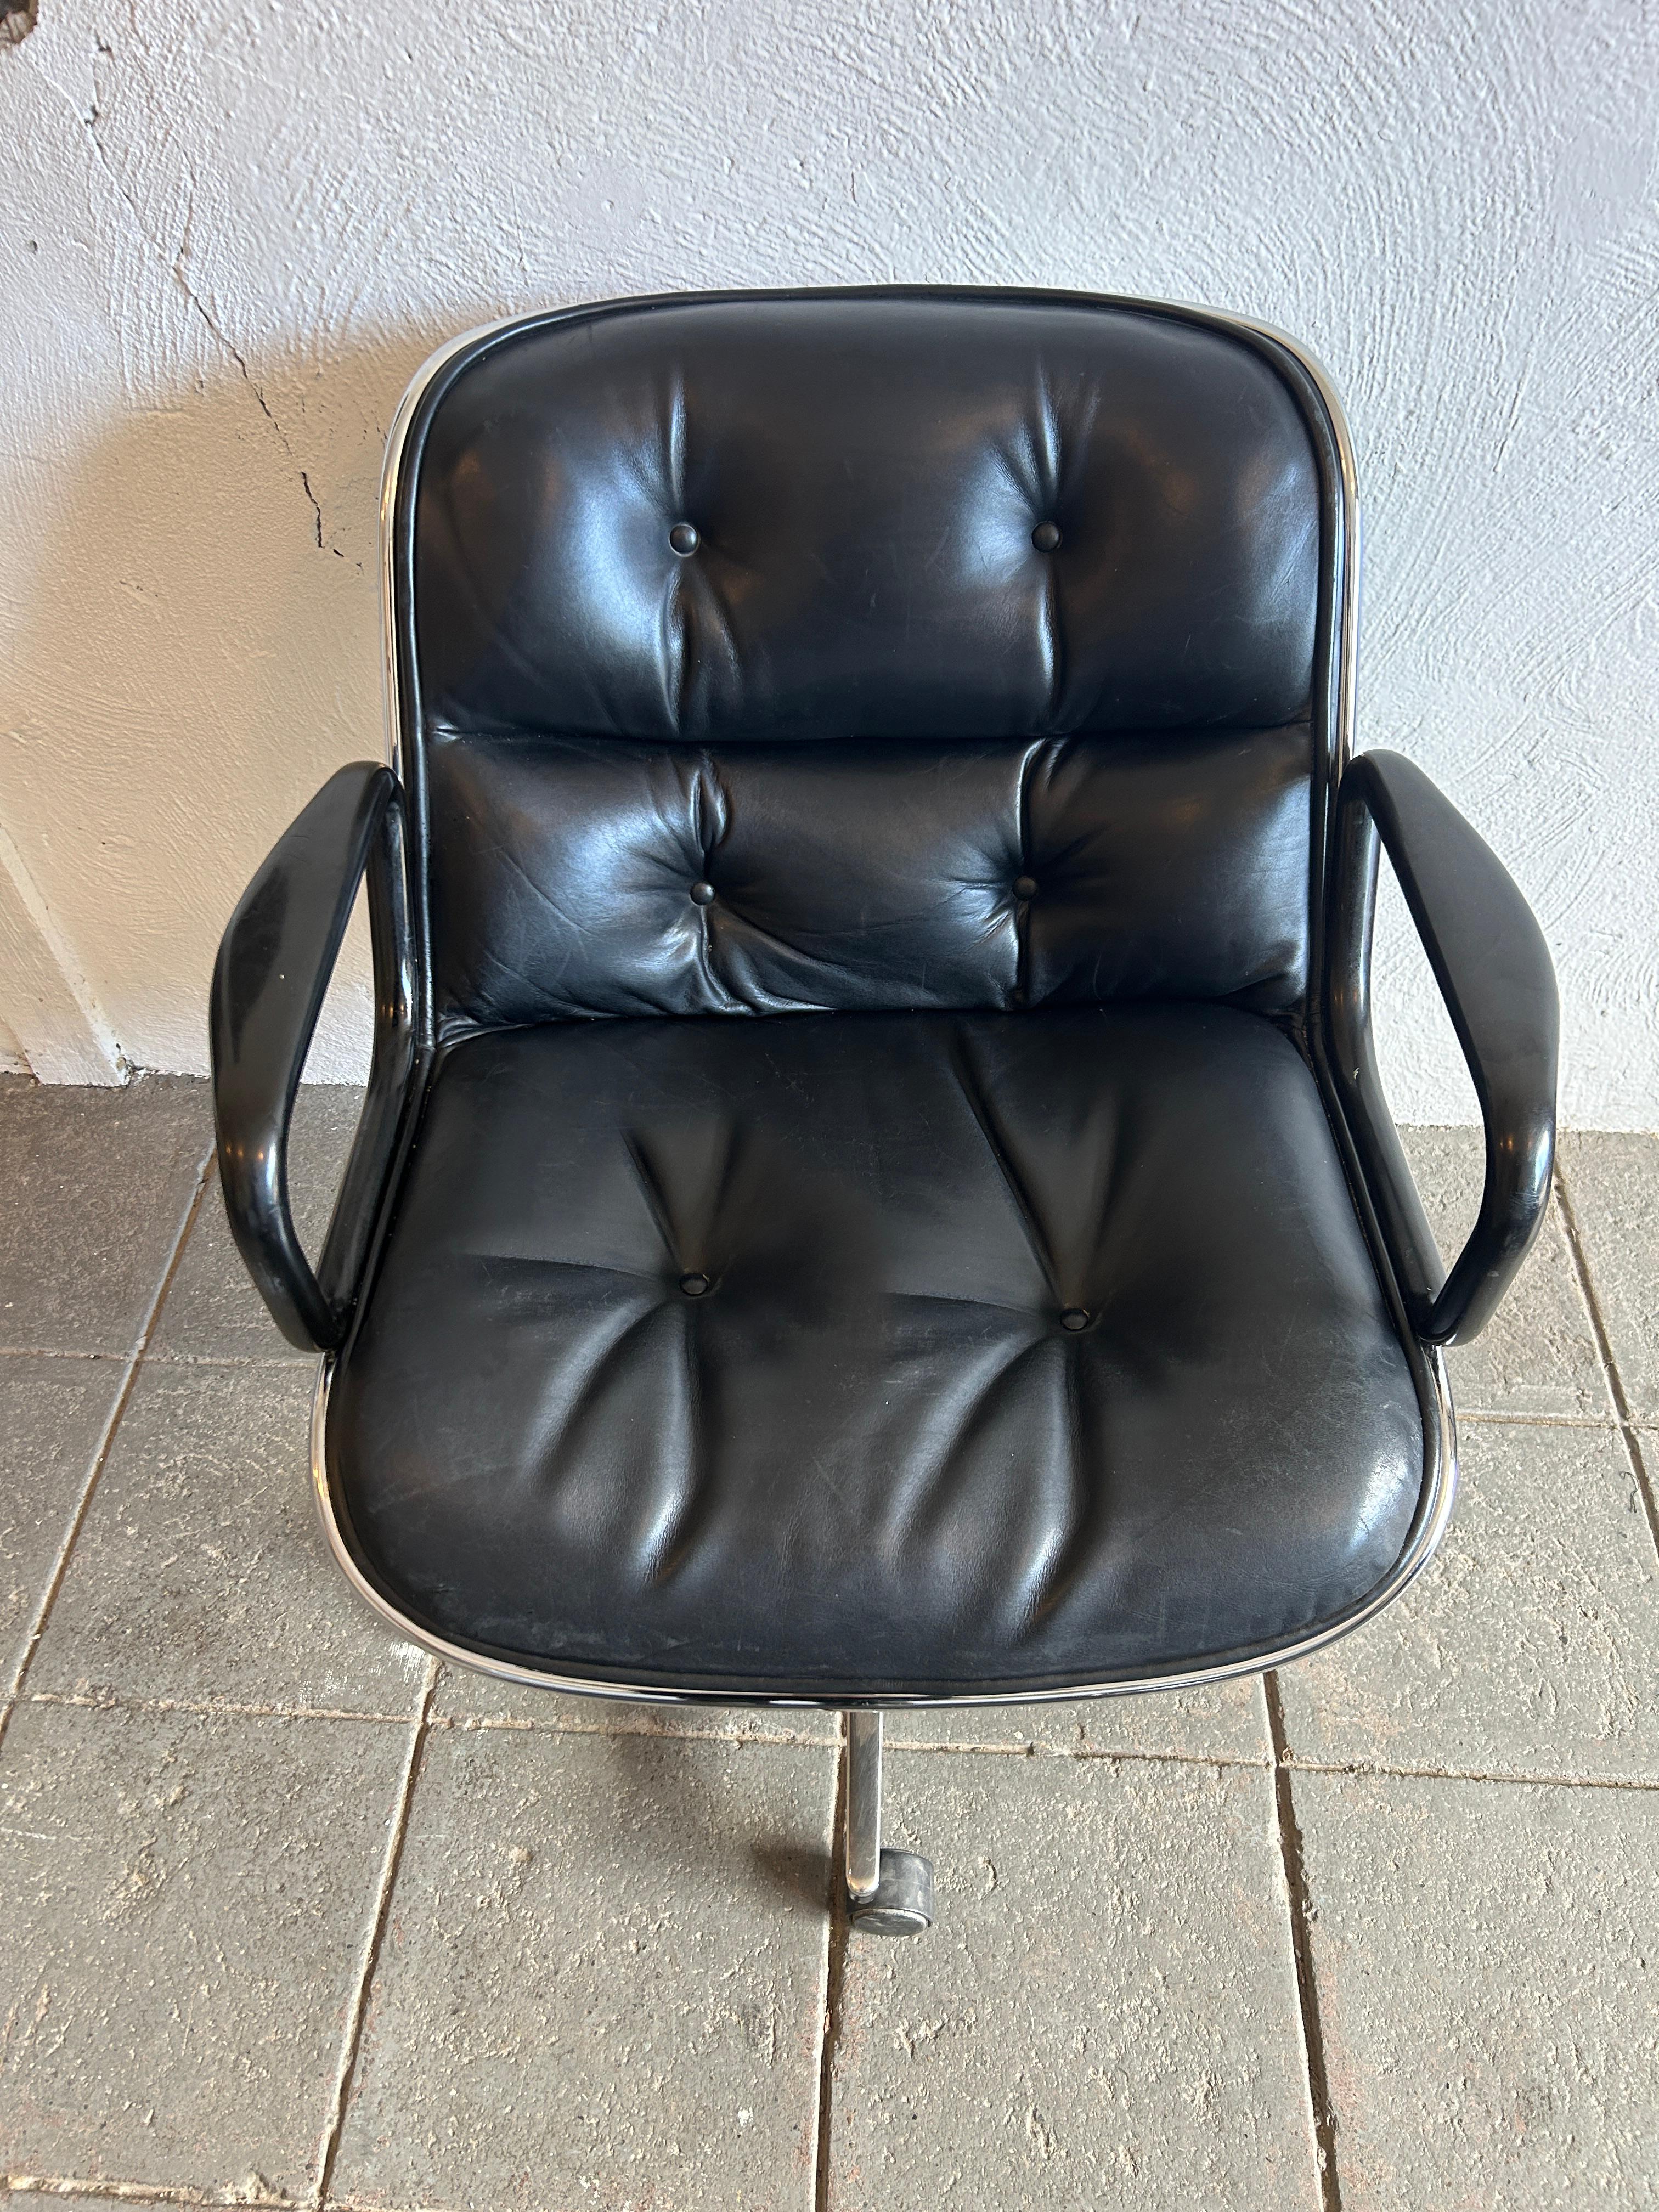 American Mid-Century Modern Charles Pollock Executive Chair for Knoll in Black Leather For Sale